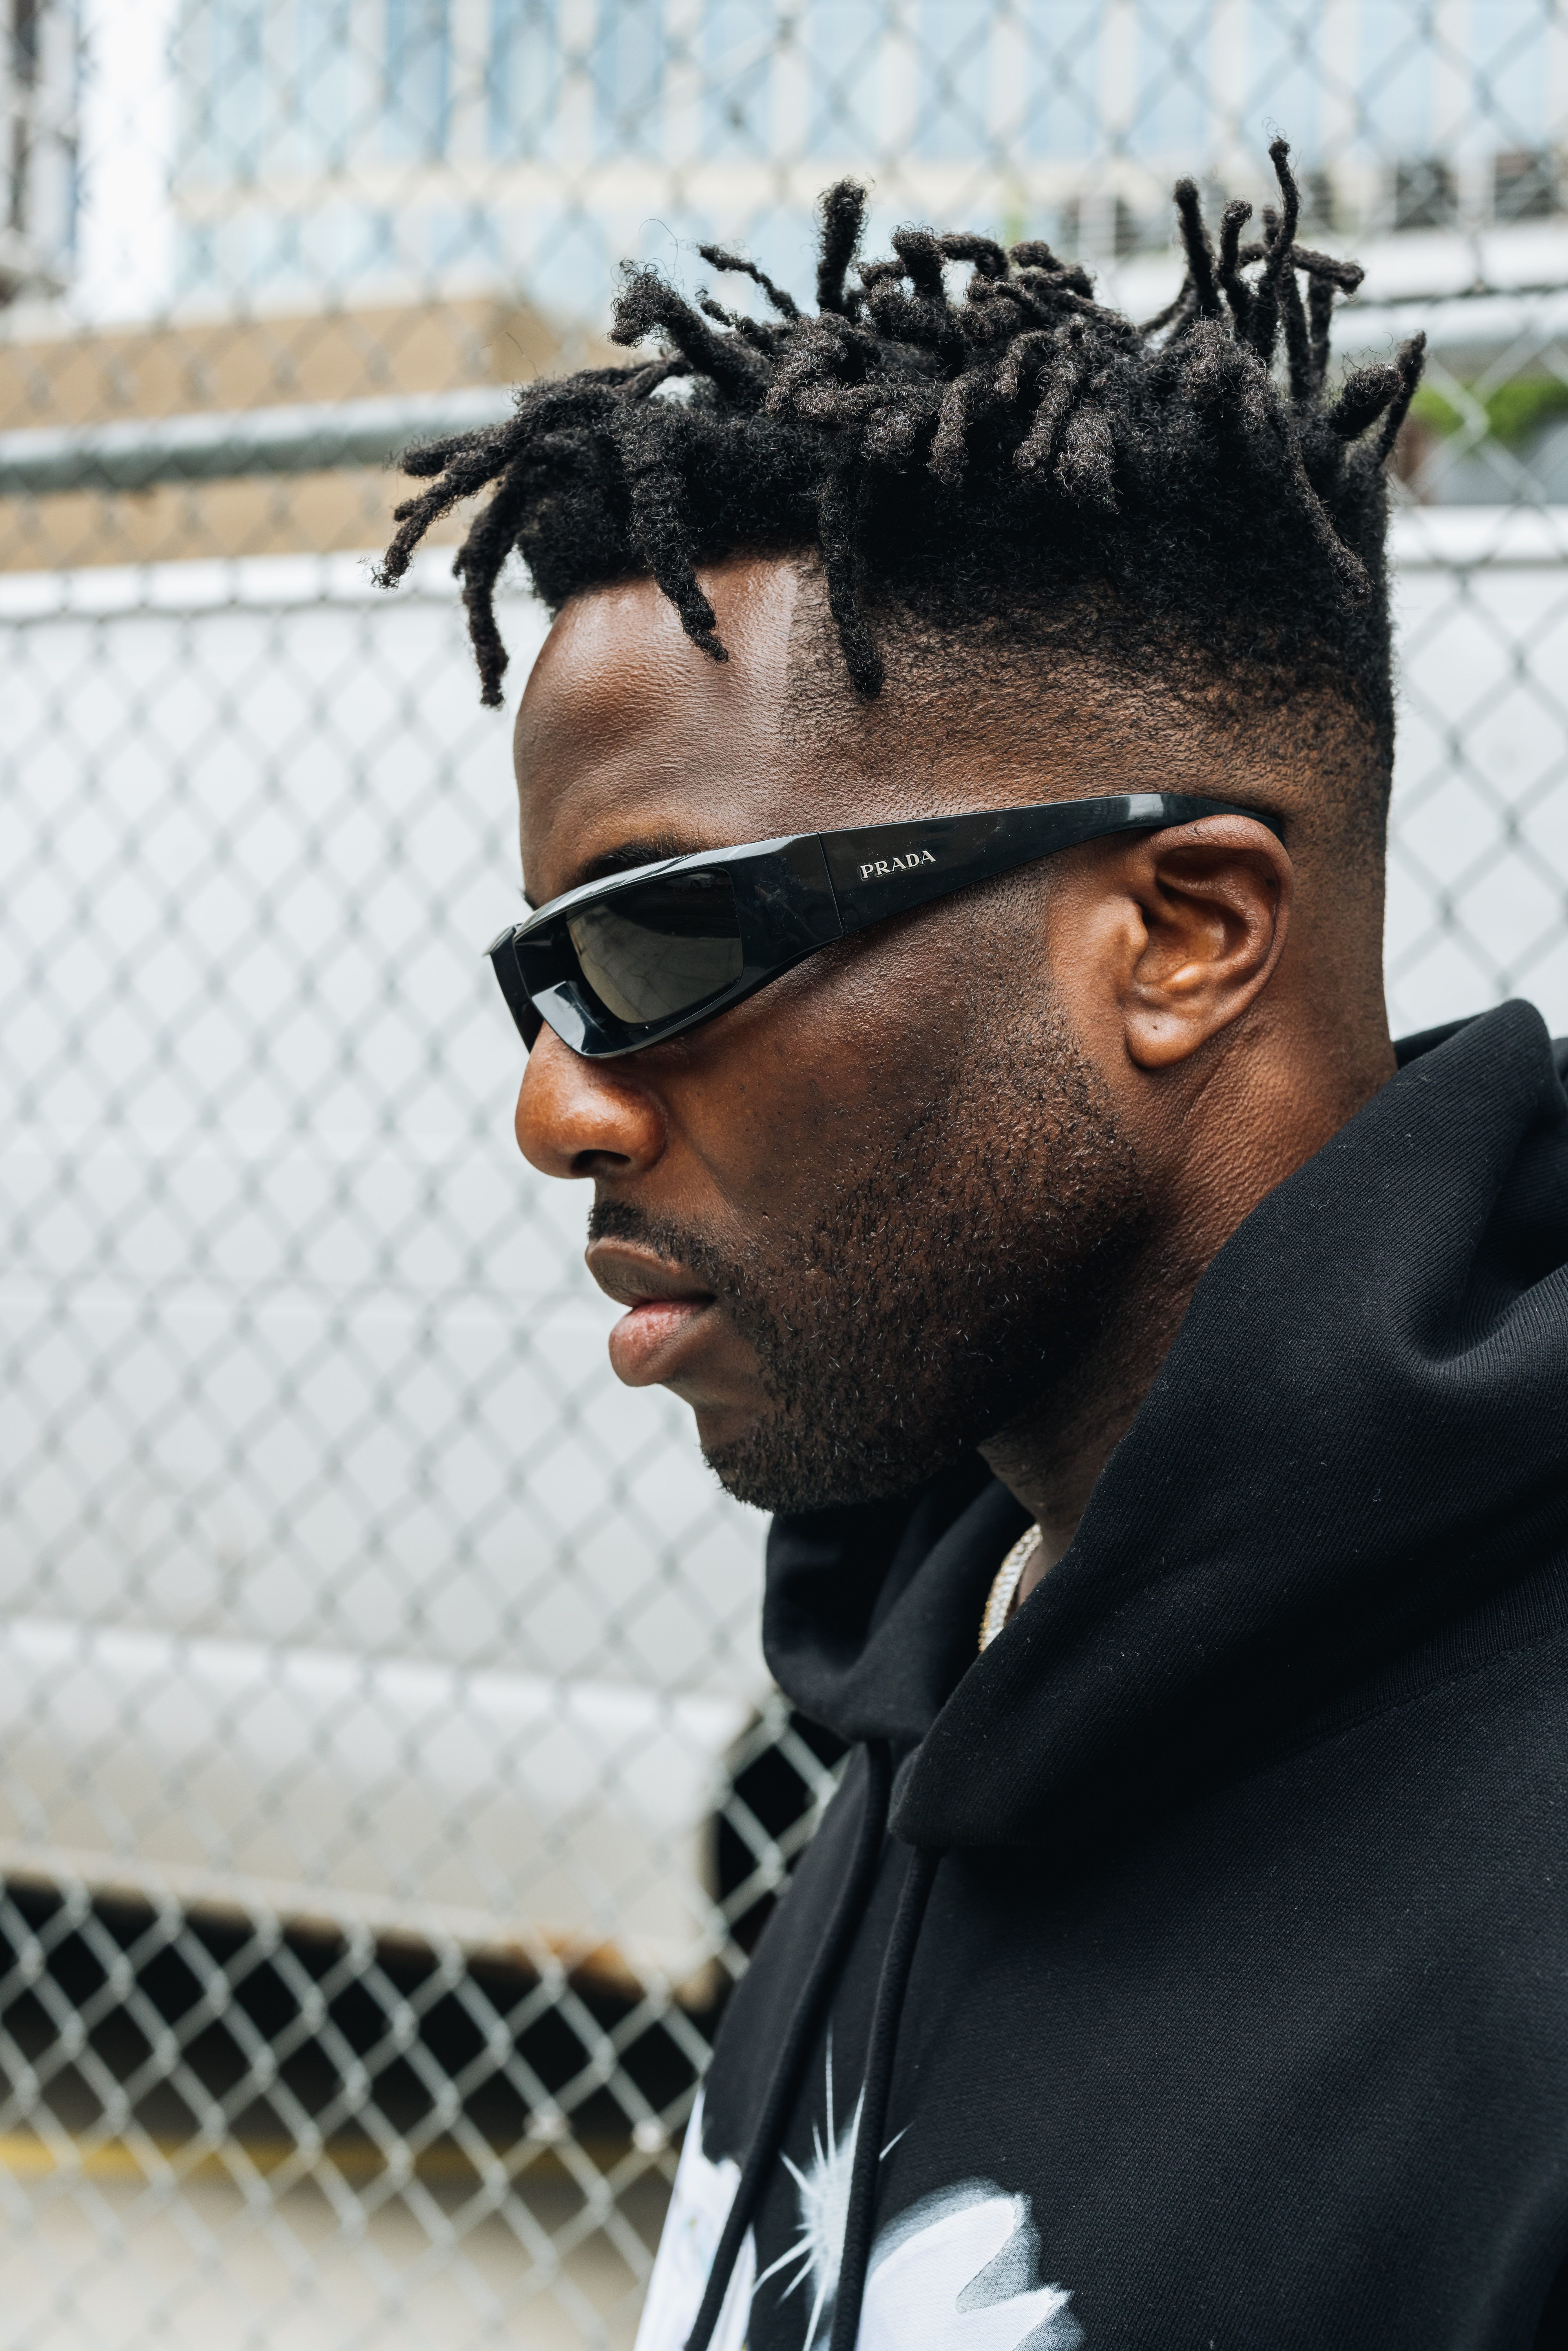 Street-Styled BMXer And Entrepreneur Nigel Sylvester Joins Linx Global